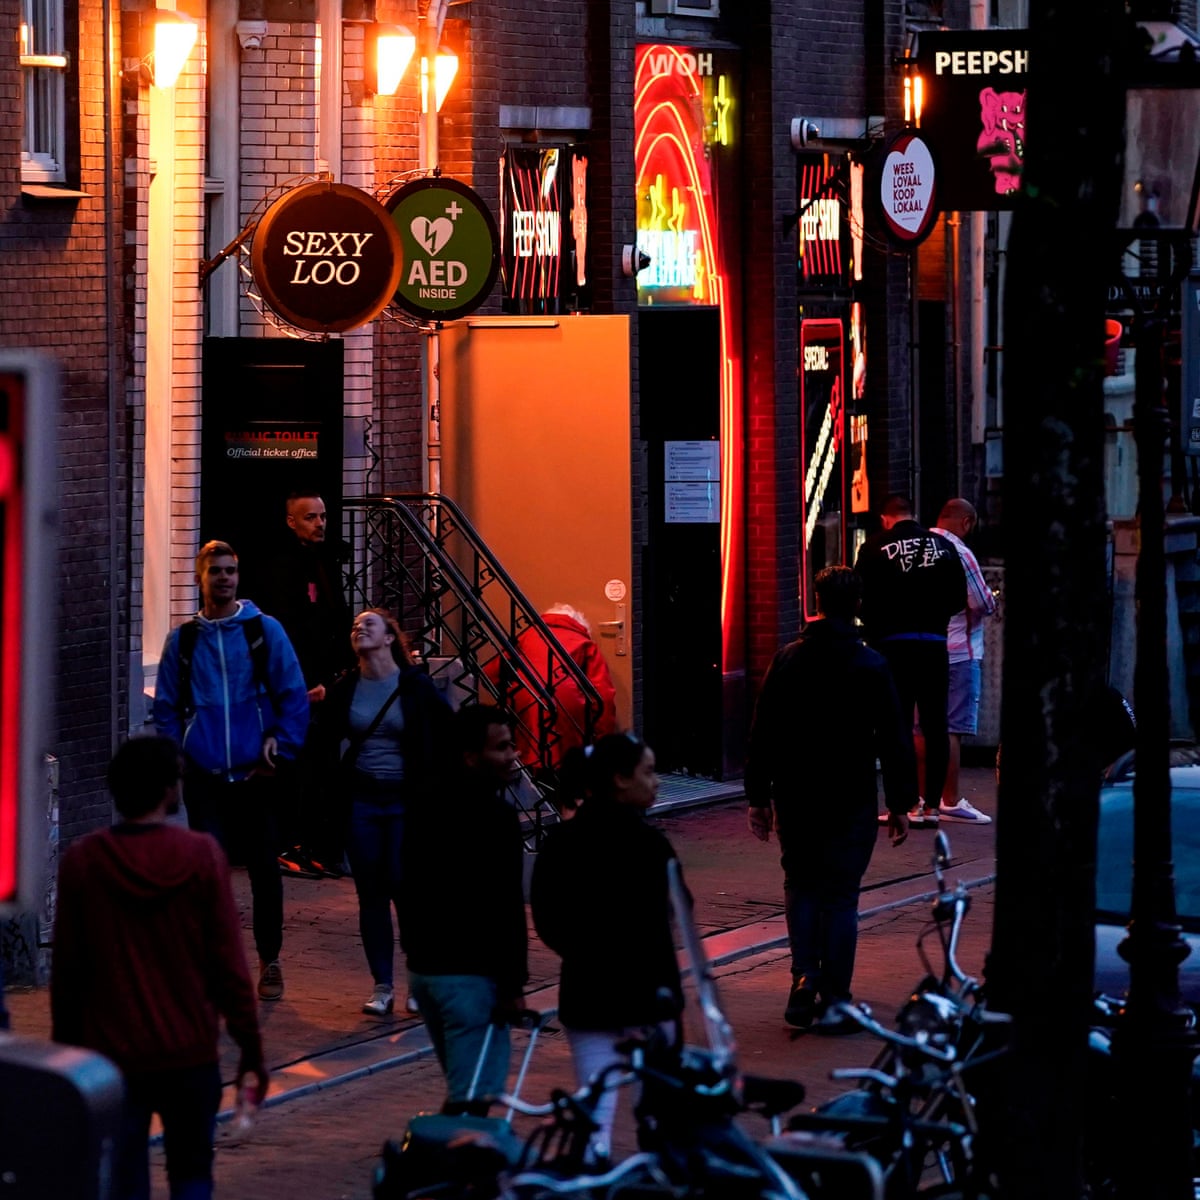 No kissing': Amsterdam's red light district reopens after shutdown | The Guardian